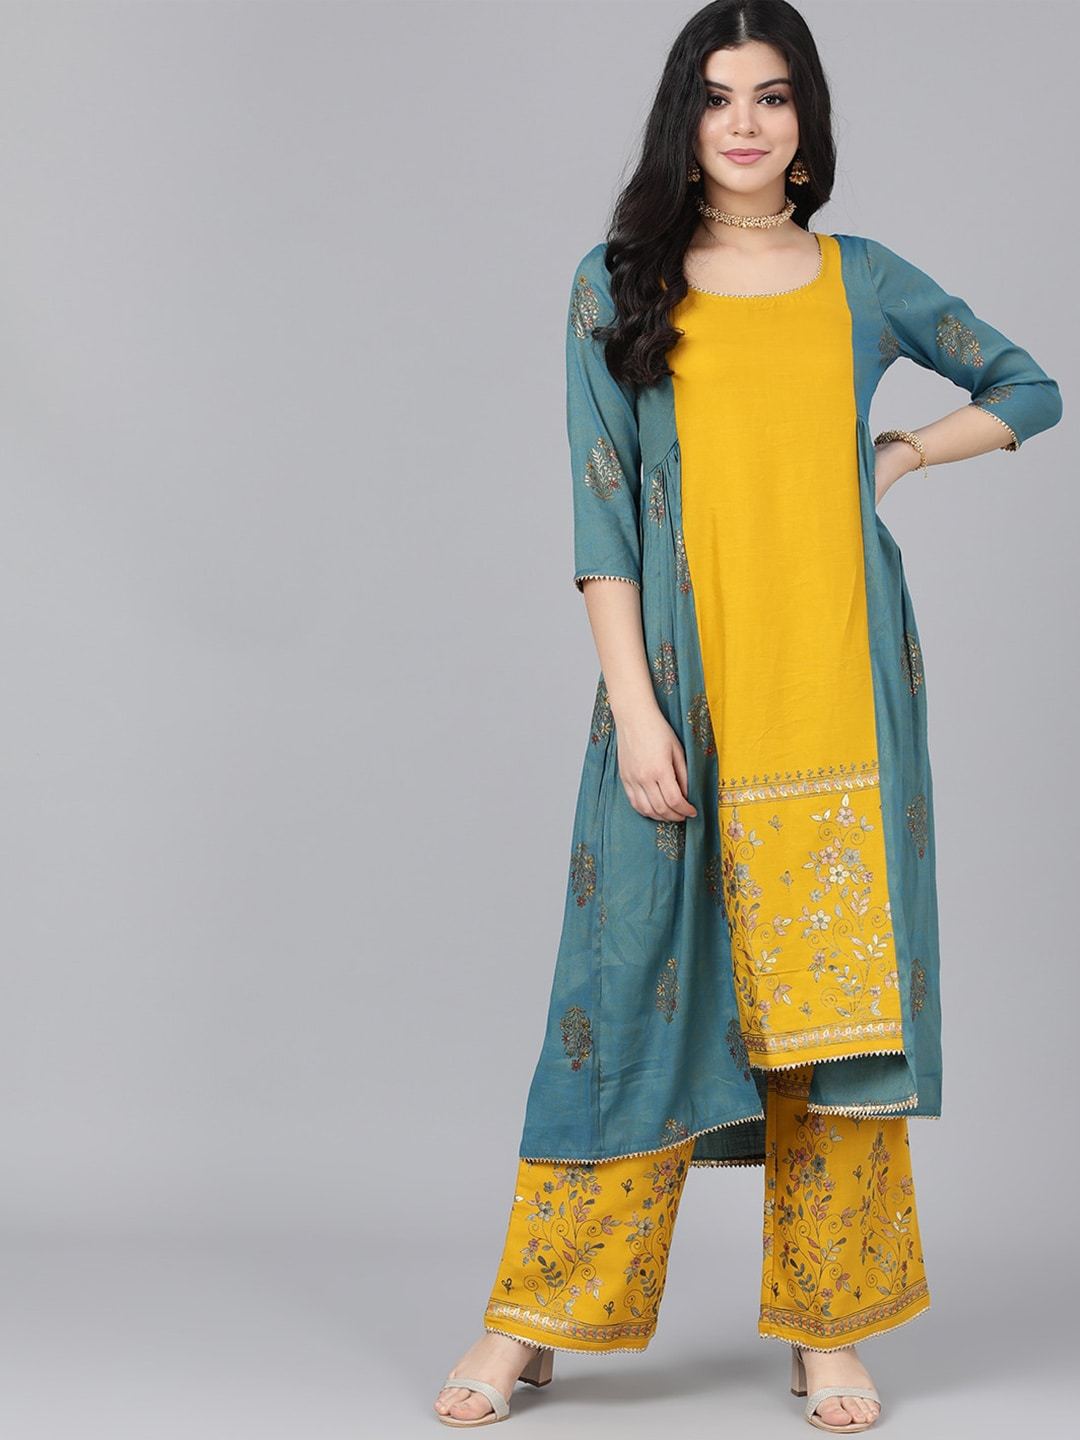 Women's  Mustard Yellow & Blue Floral Embroidered Kurta with Palazzos & Jacket - AKS